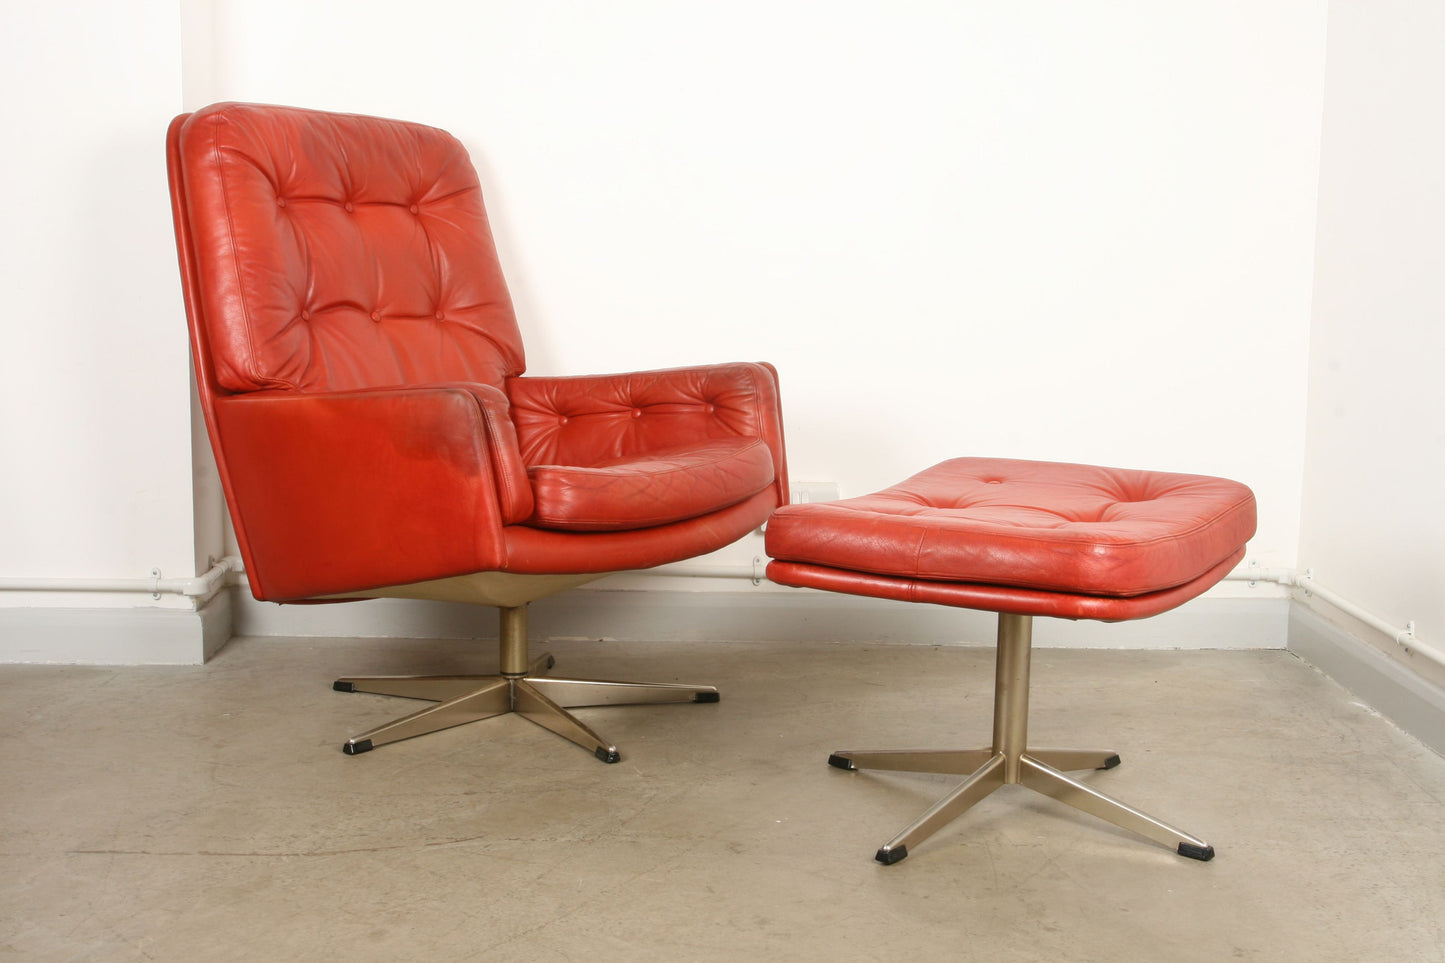 High back leather lounger with matching foot stool